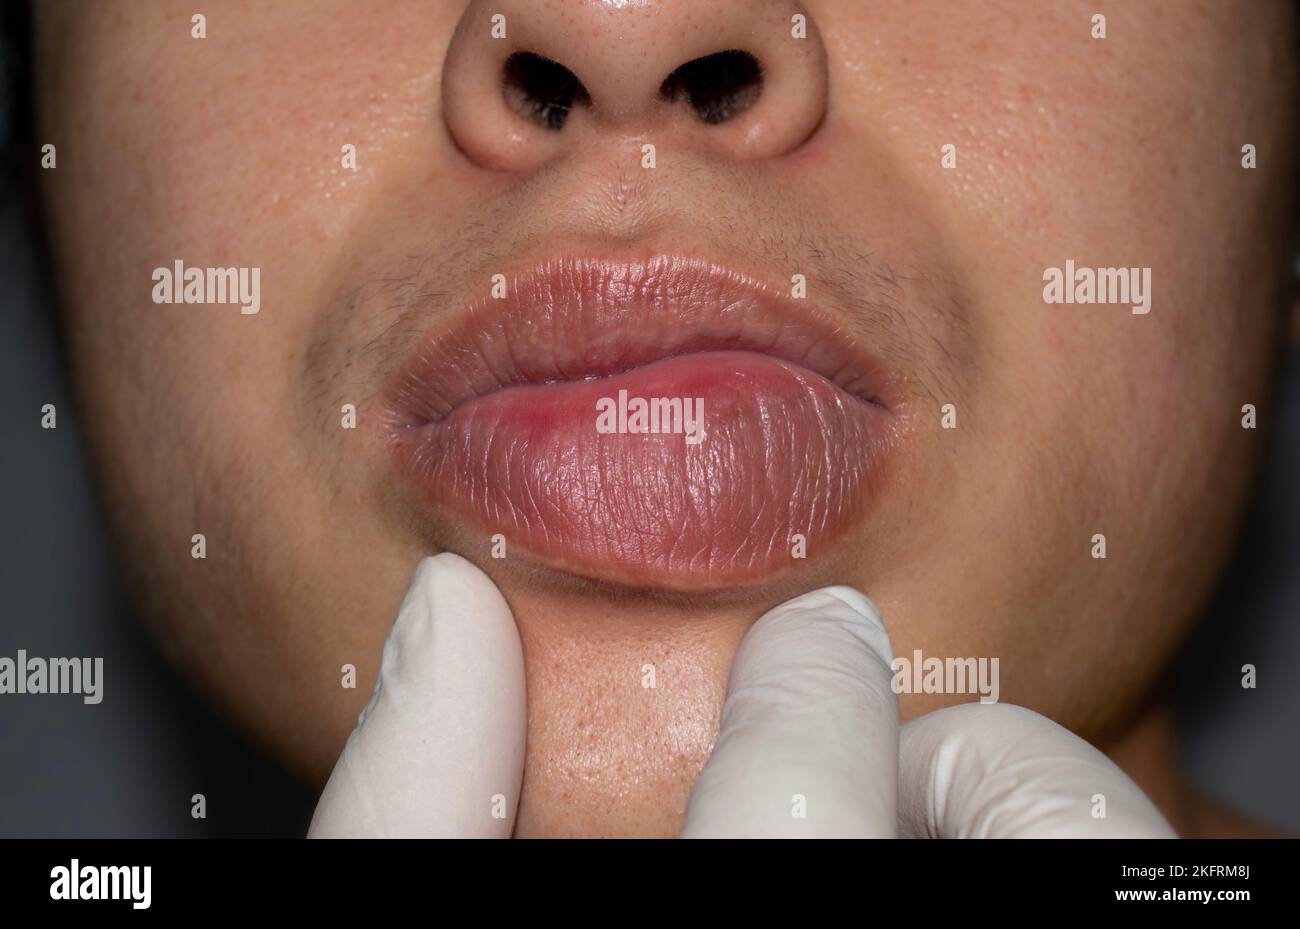 Swollen or thickened lip of Asian young man. Angioedema. Causes may be allergies, infection, injury, etc. Stock Photo